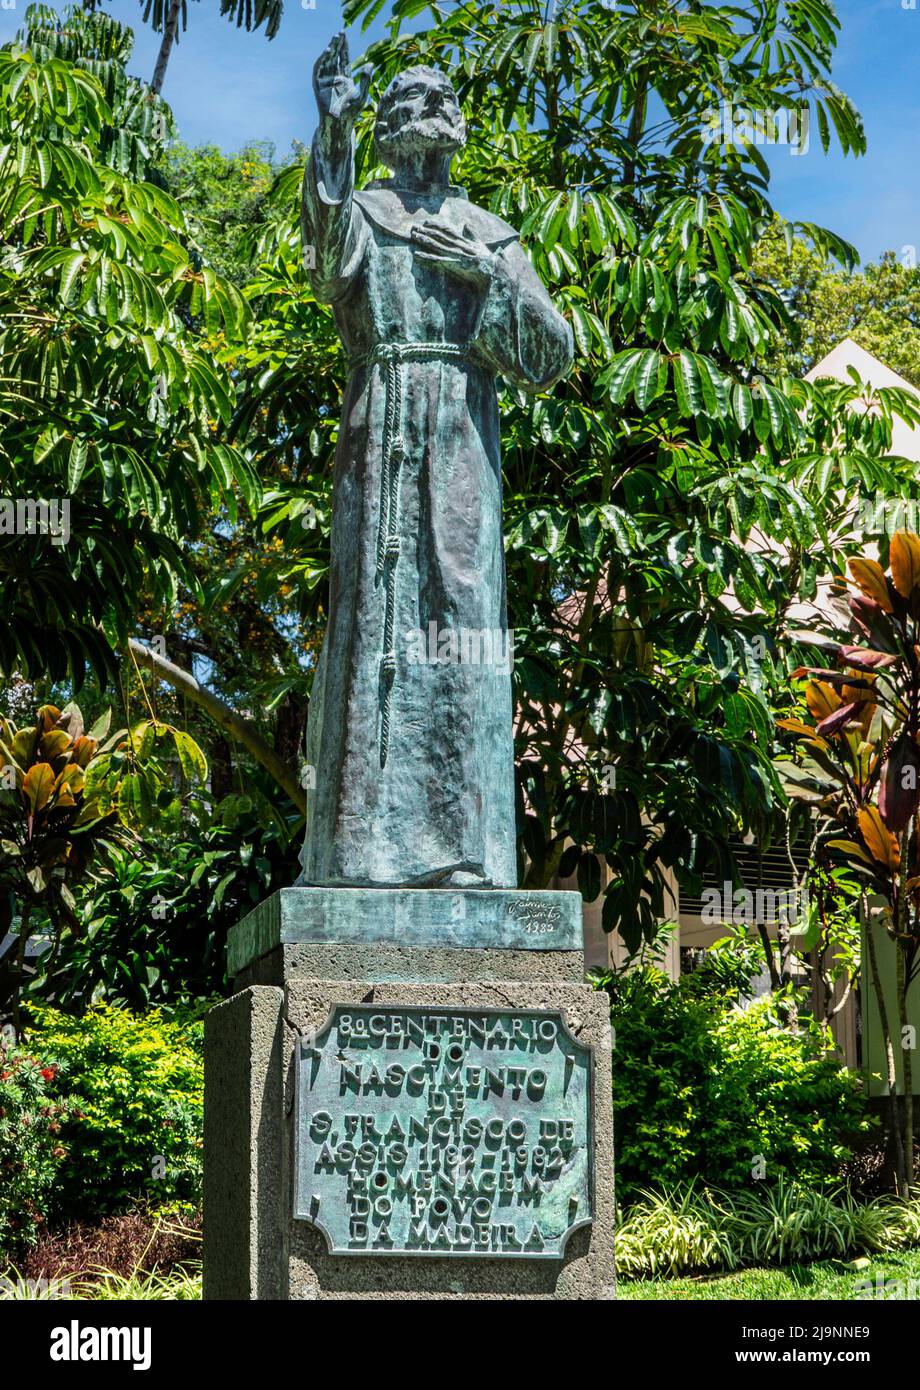 The bronze statue of St Francis of Assisi in the Municipal Gardens, Funchal, Madeira. Sculptor Jaime Santos. Stock Photo